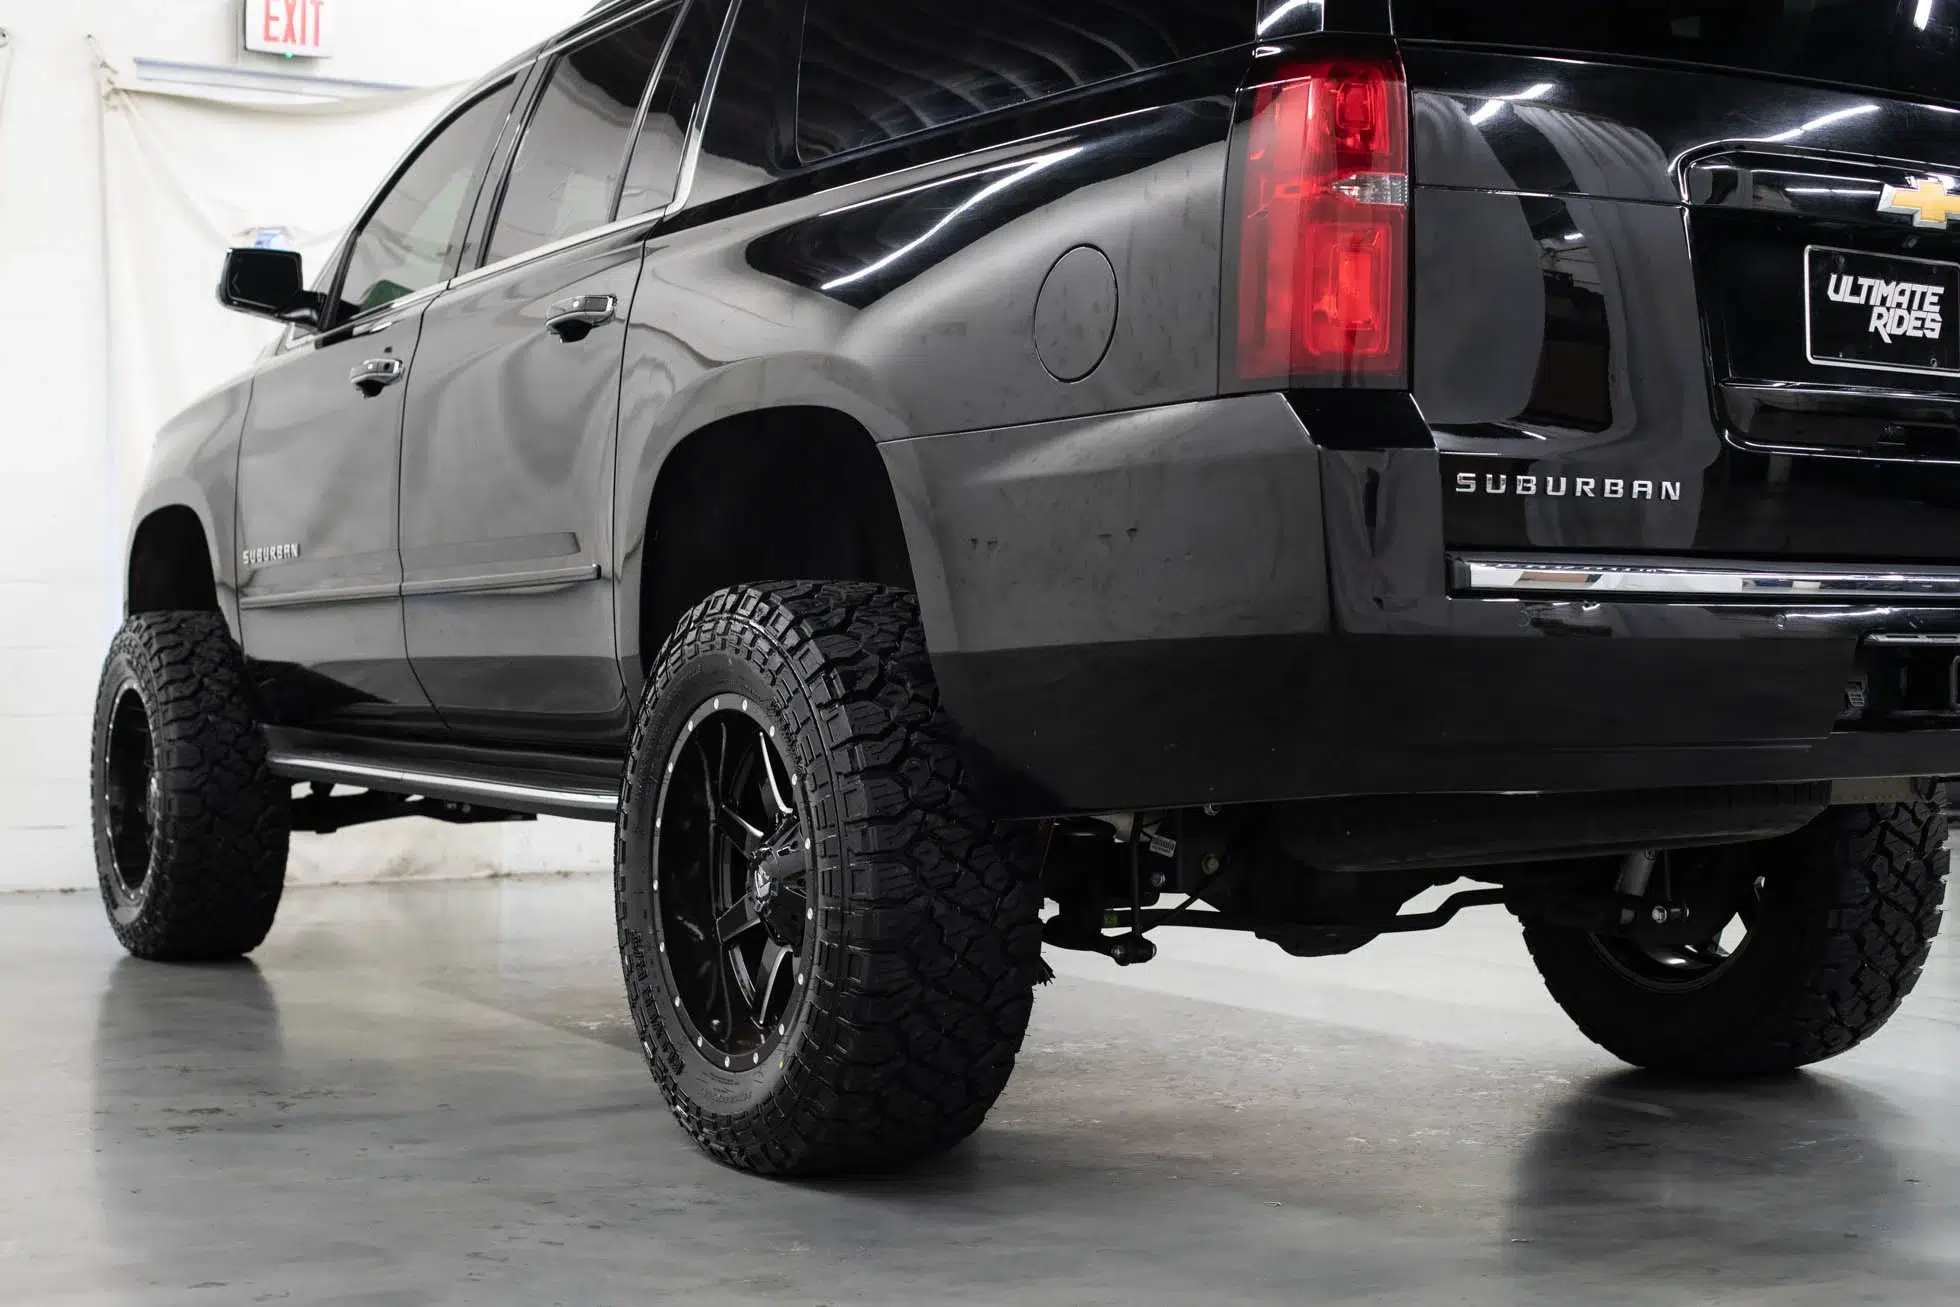 Lifted Suburban for Sale